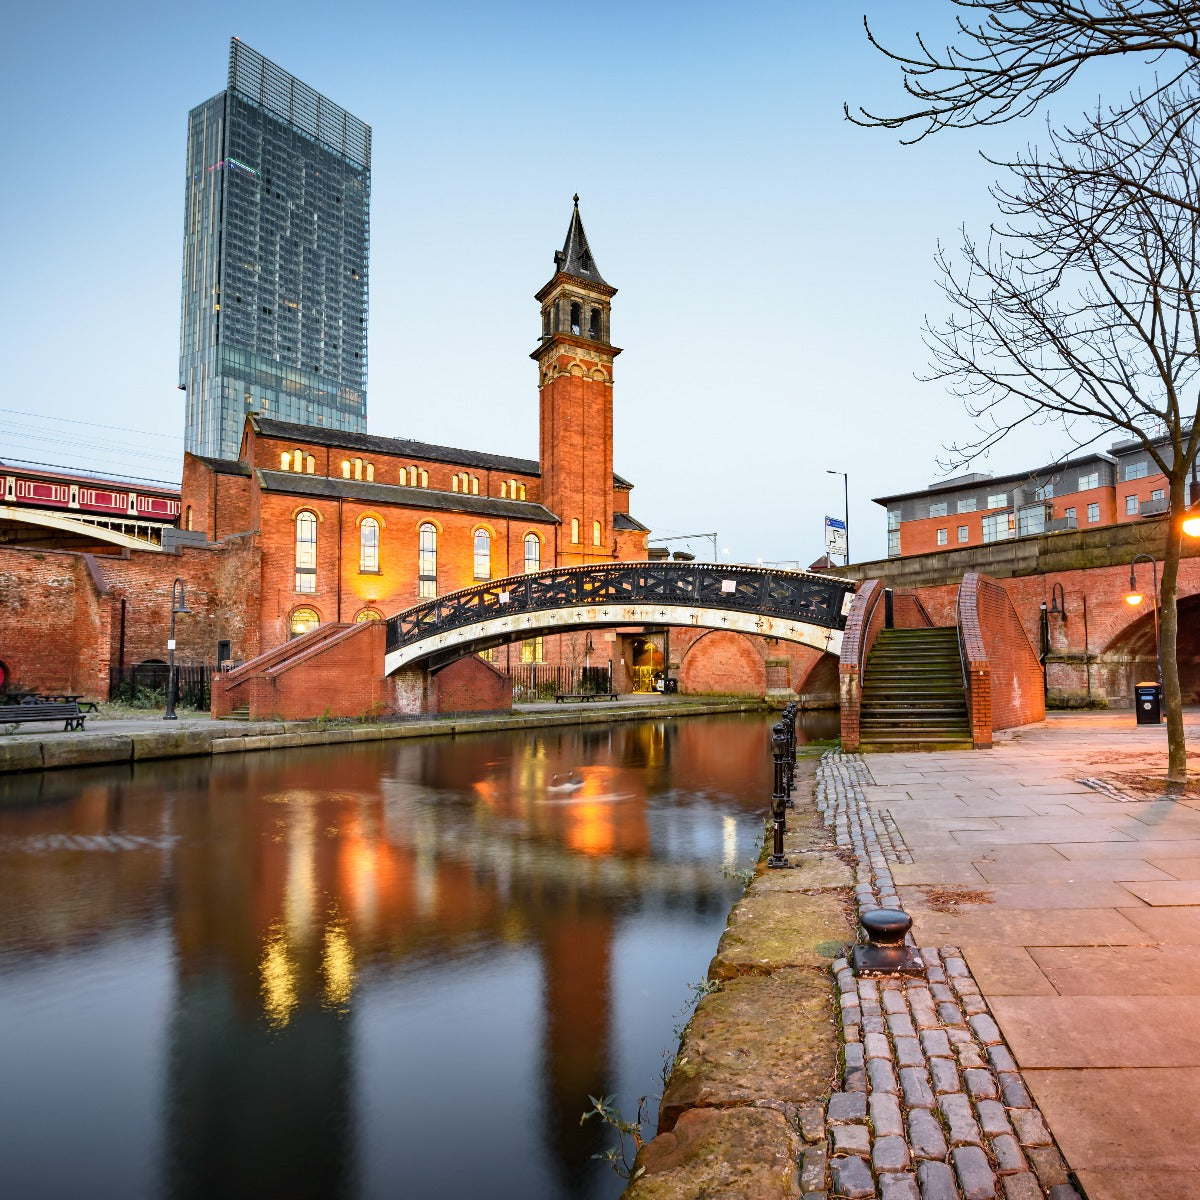 Beside the canal at Manchester Castlefield